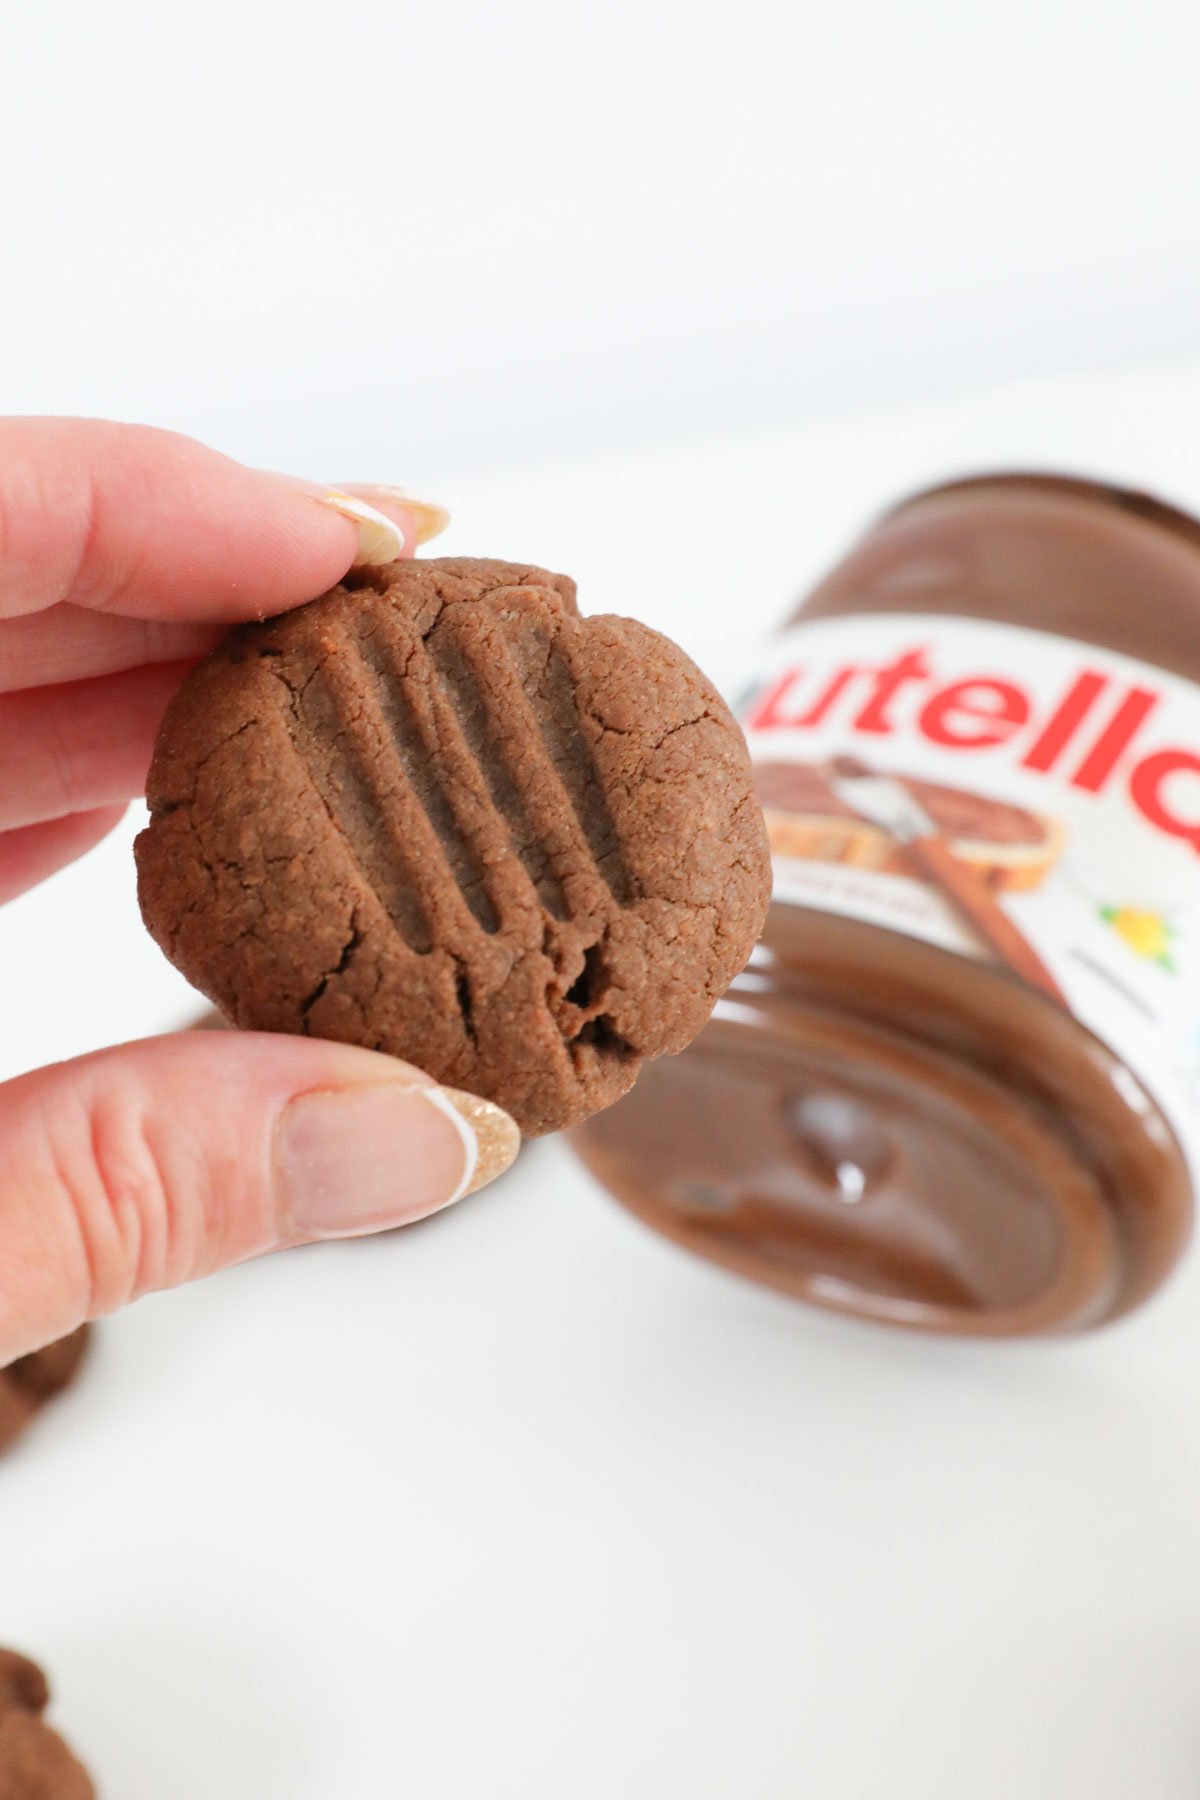 A hand holding up a Nutella cookie, with a jar in the background.